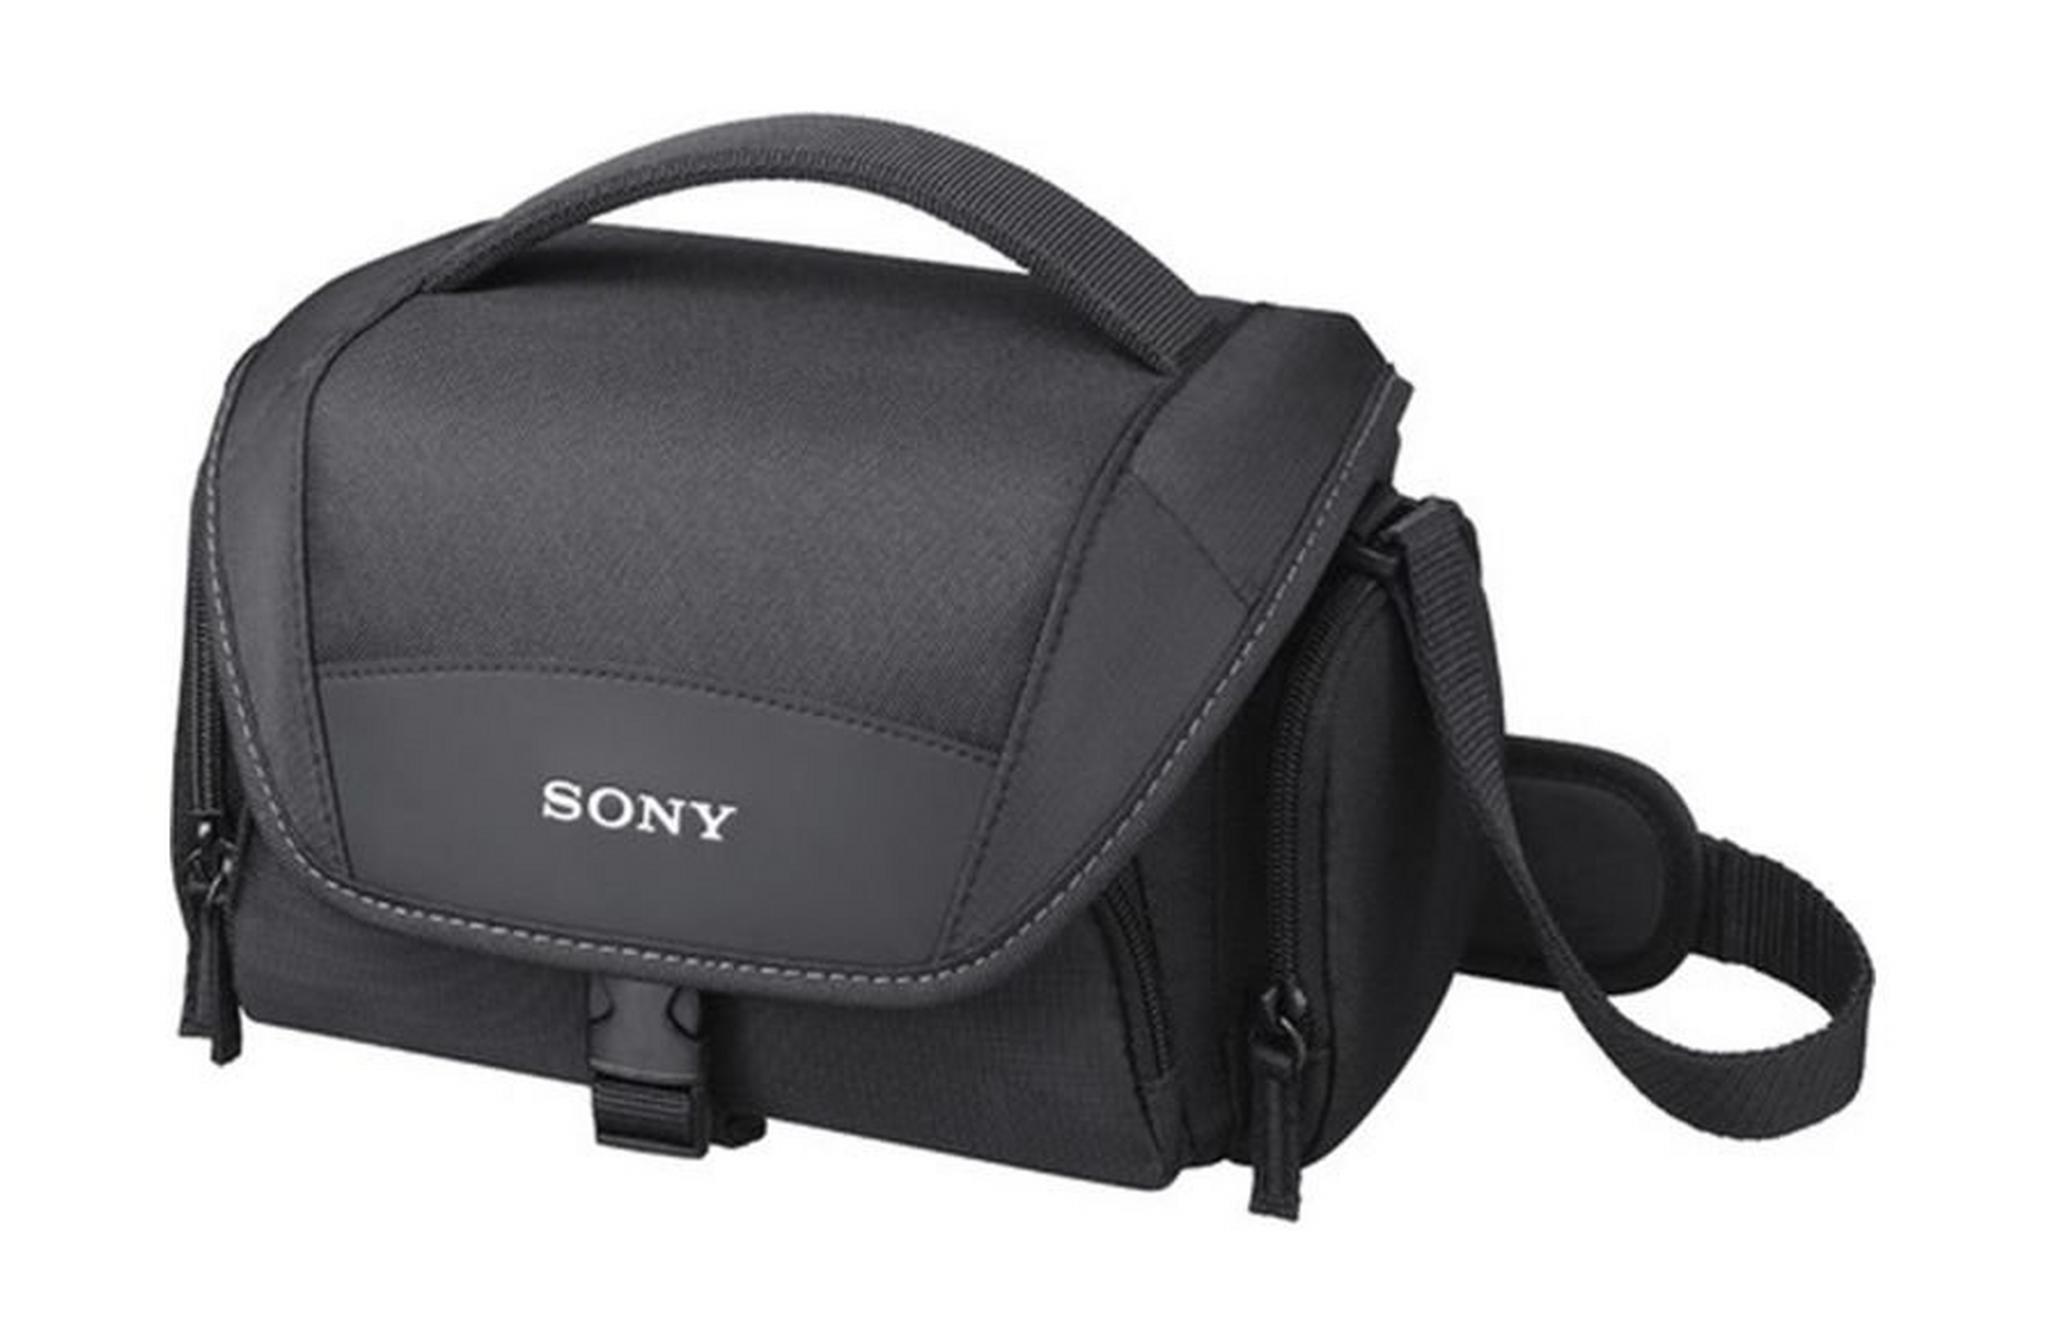 Sony Protective Soft Carrying Case (LCS-U21) - Black